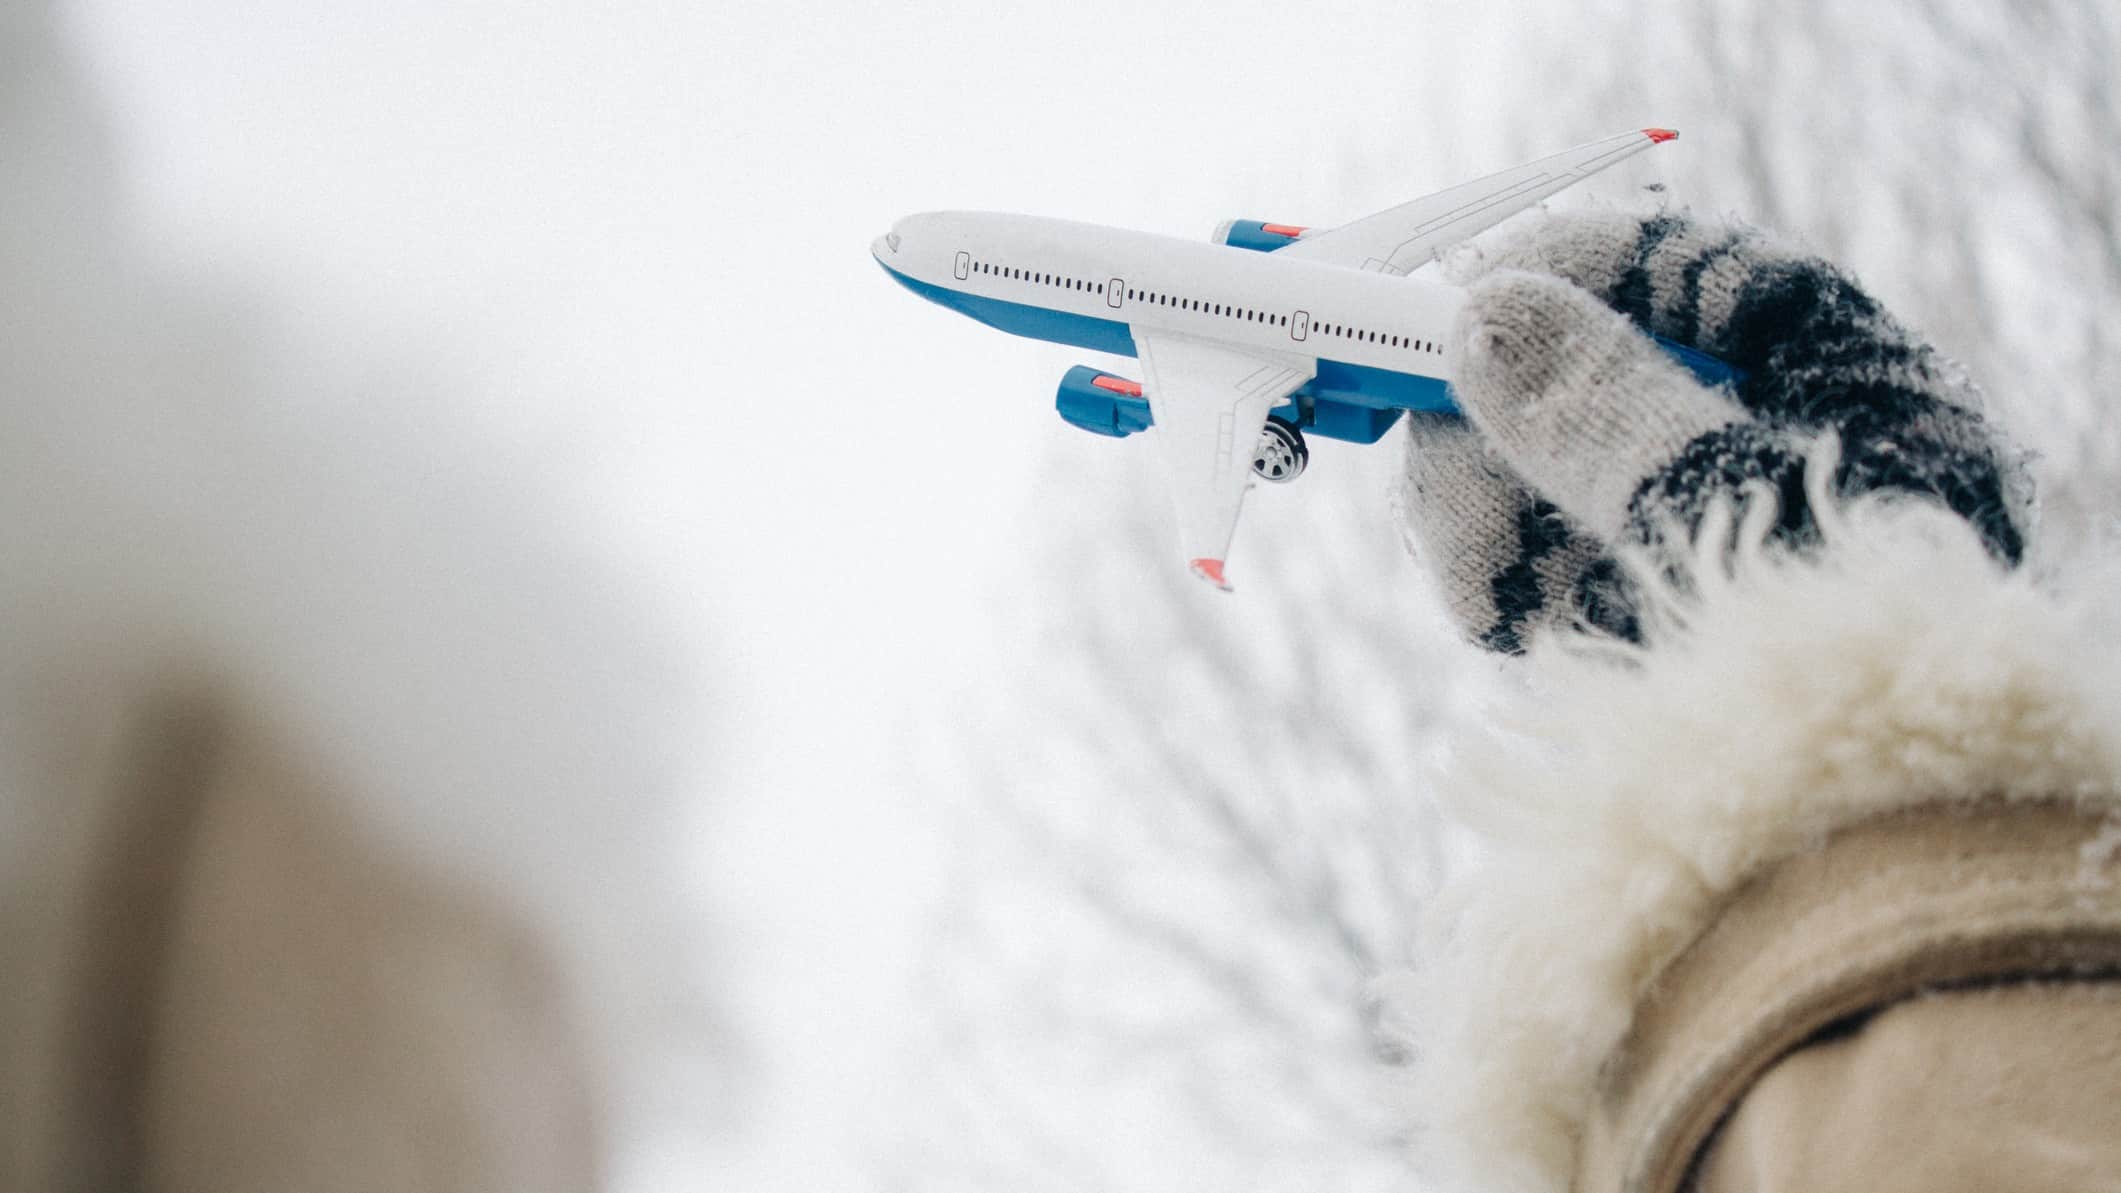 A gloved hand holds a toy metal aeroplane agains the backdrop of a snowy, icy landscape.